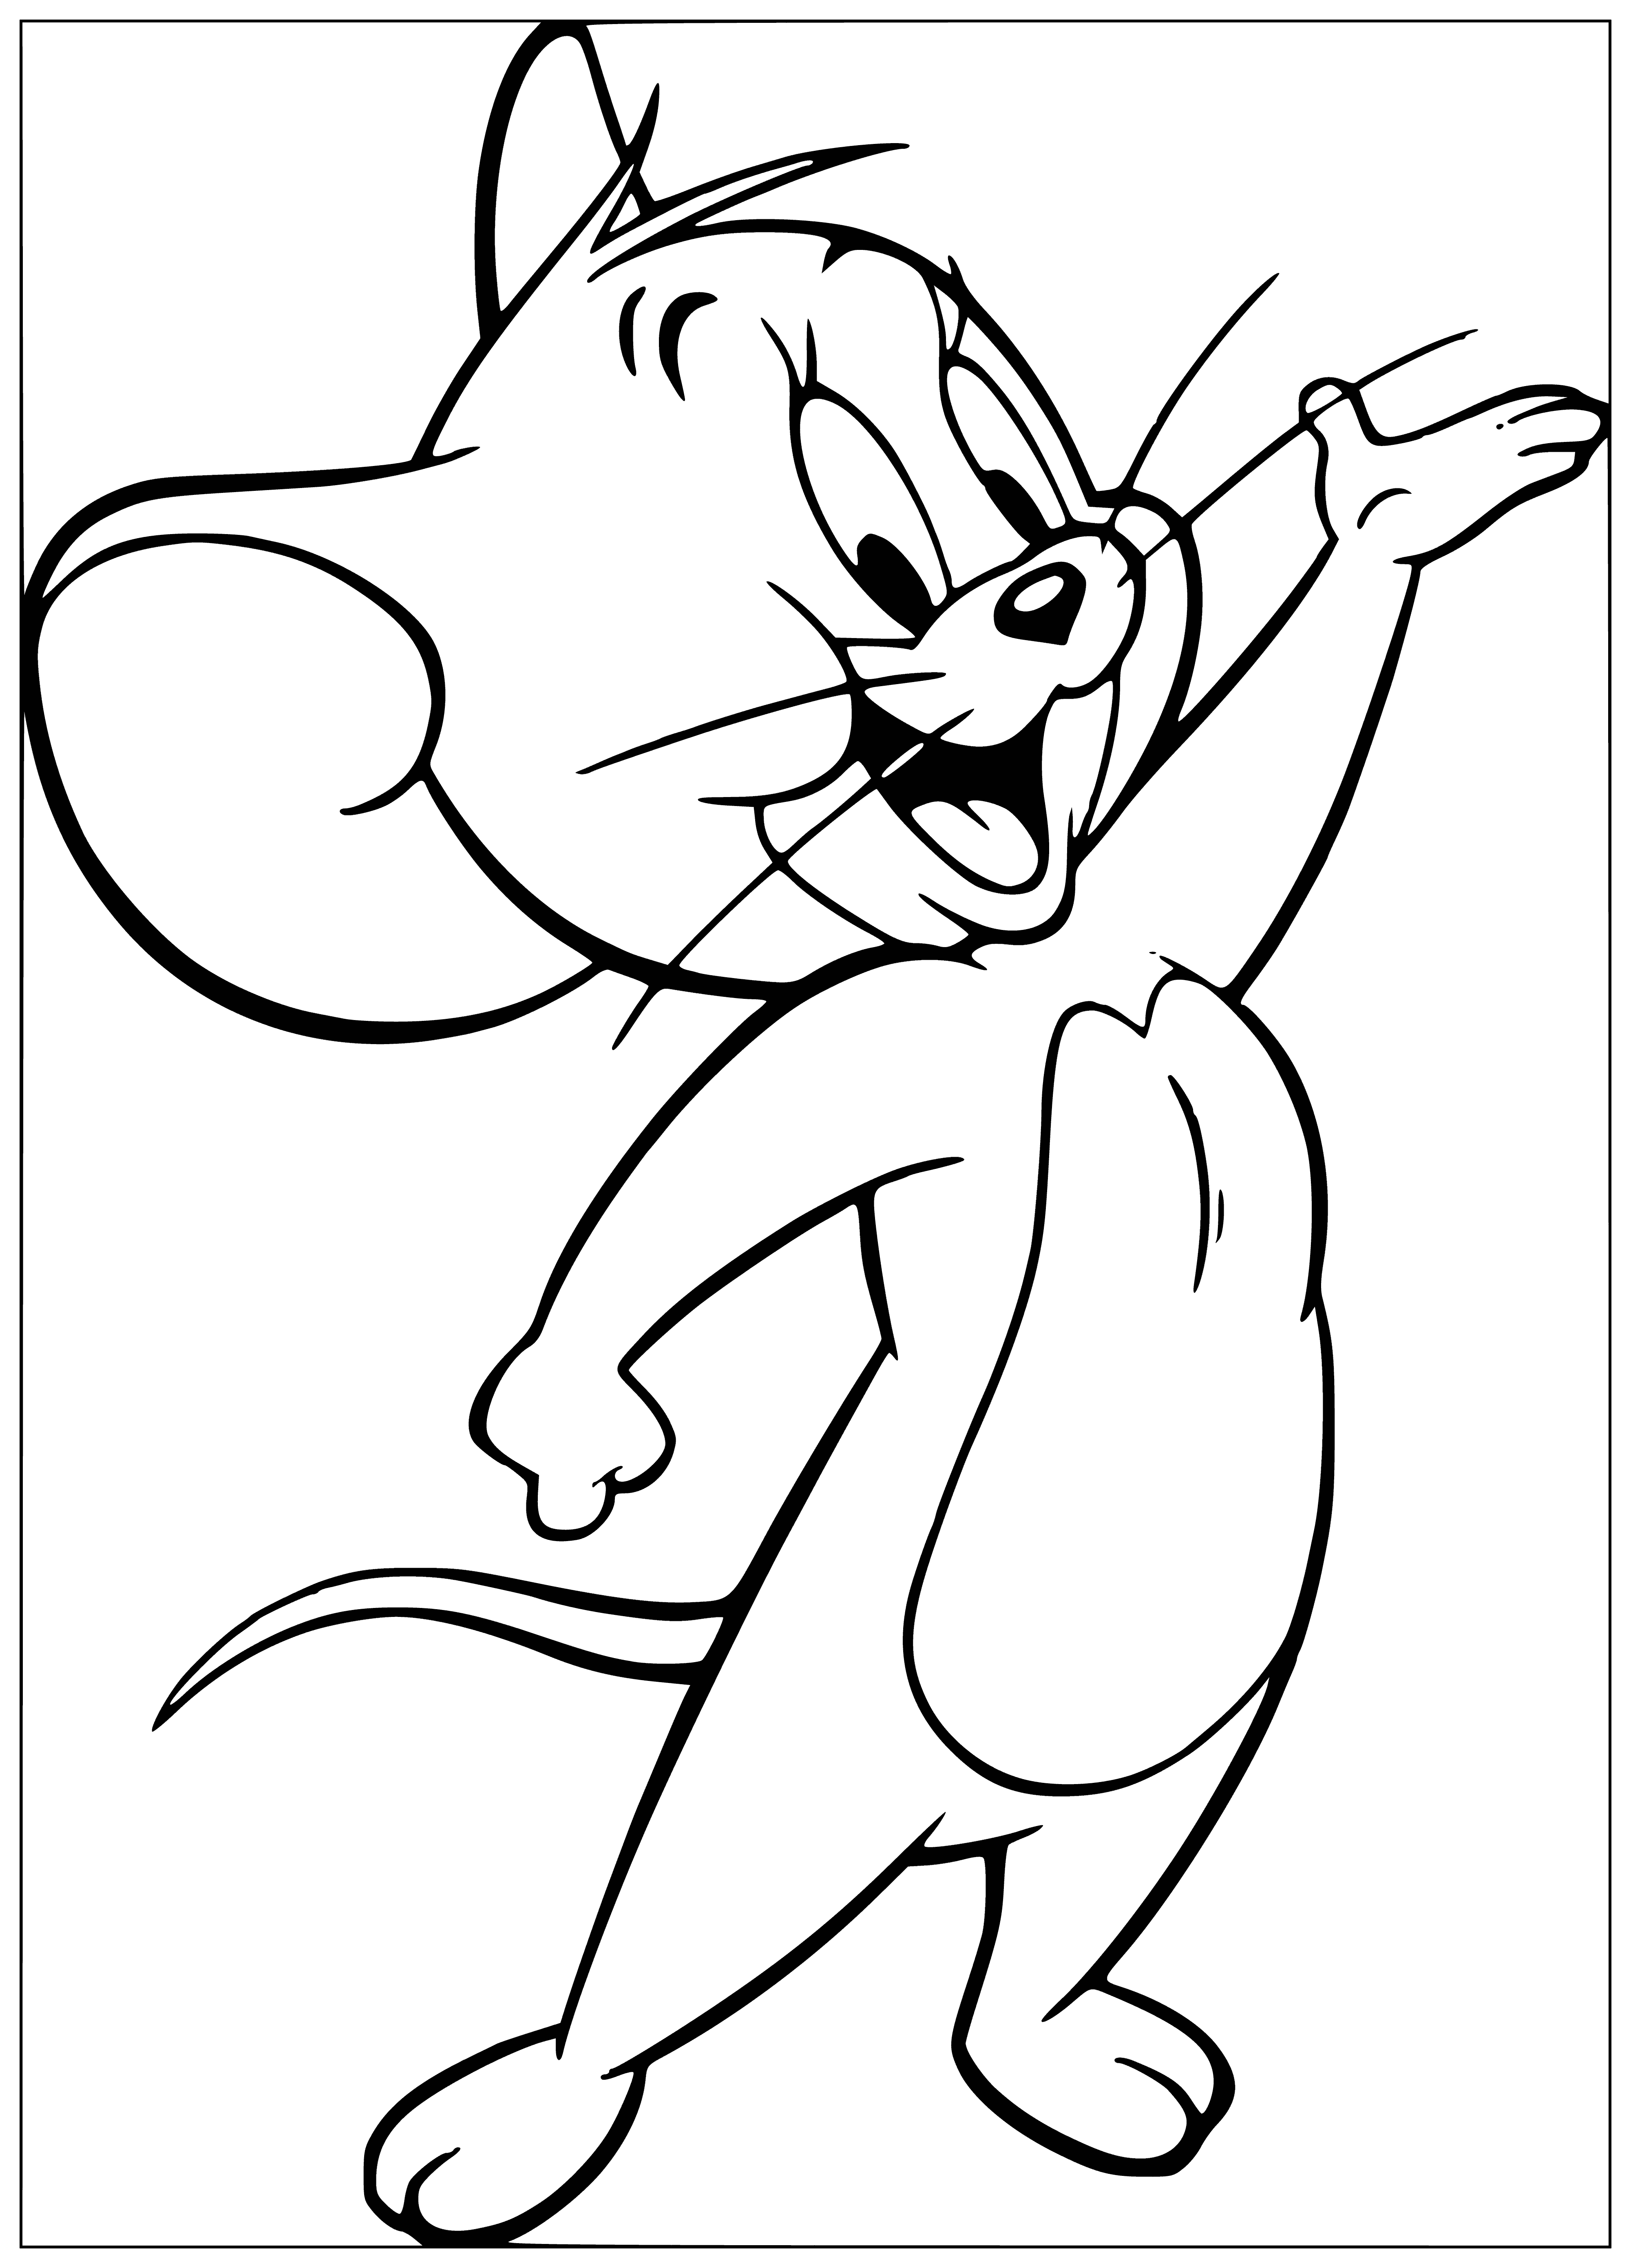 coloring page: Jerry Mouse is a small brown mouse with big ears and a long tail who is always smiling. He enjoys eating cheese and drinking milk, and is friends with Tom the cat.